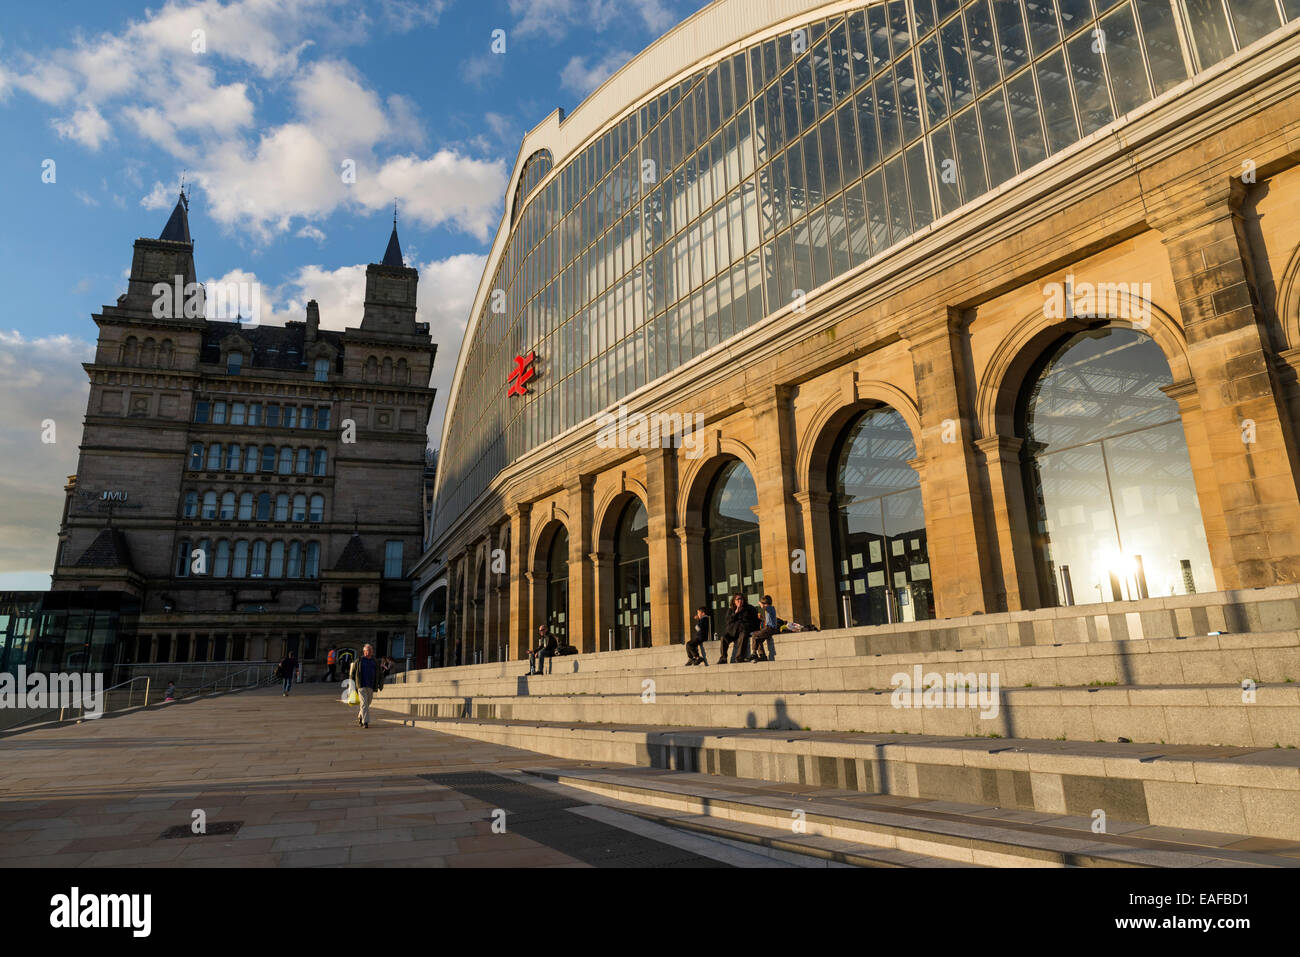 LIVERPOOL, UNITED KINGDOM - JUNE 8, 2014: Lime Street is Liverpools main rail station and has recently been restored and redevel Stock Photo